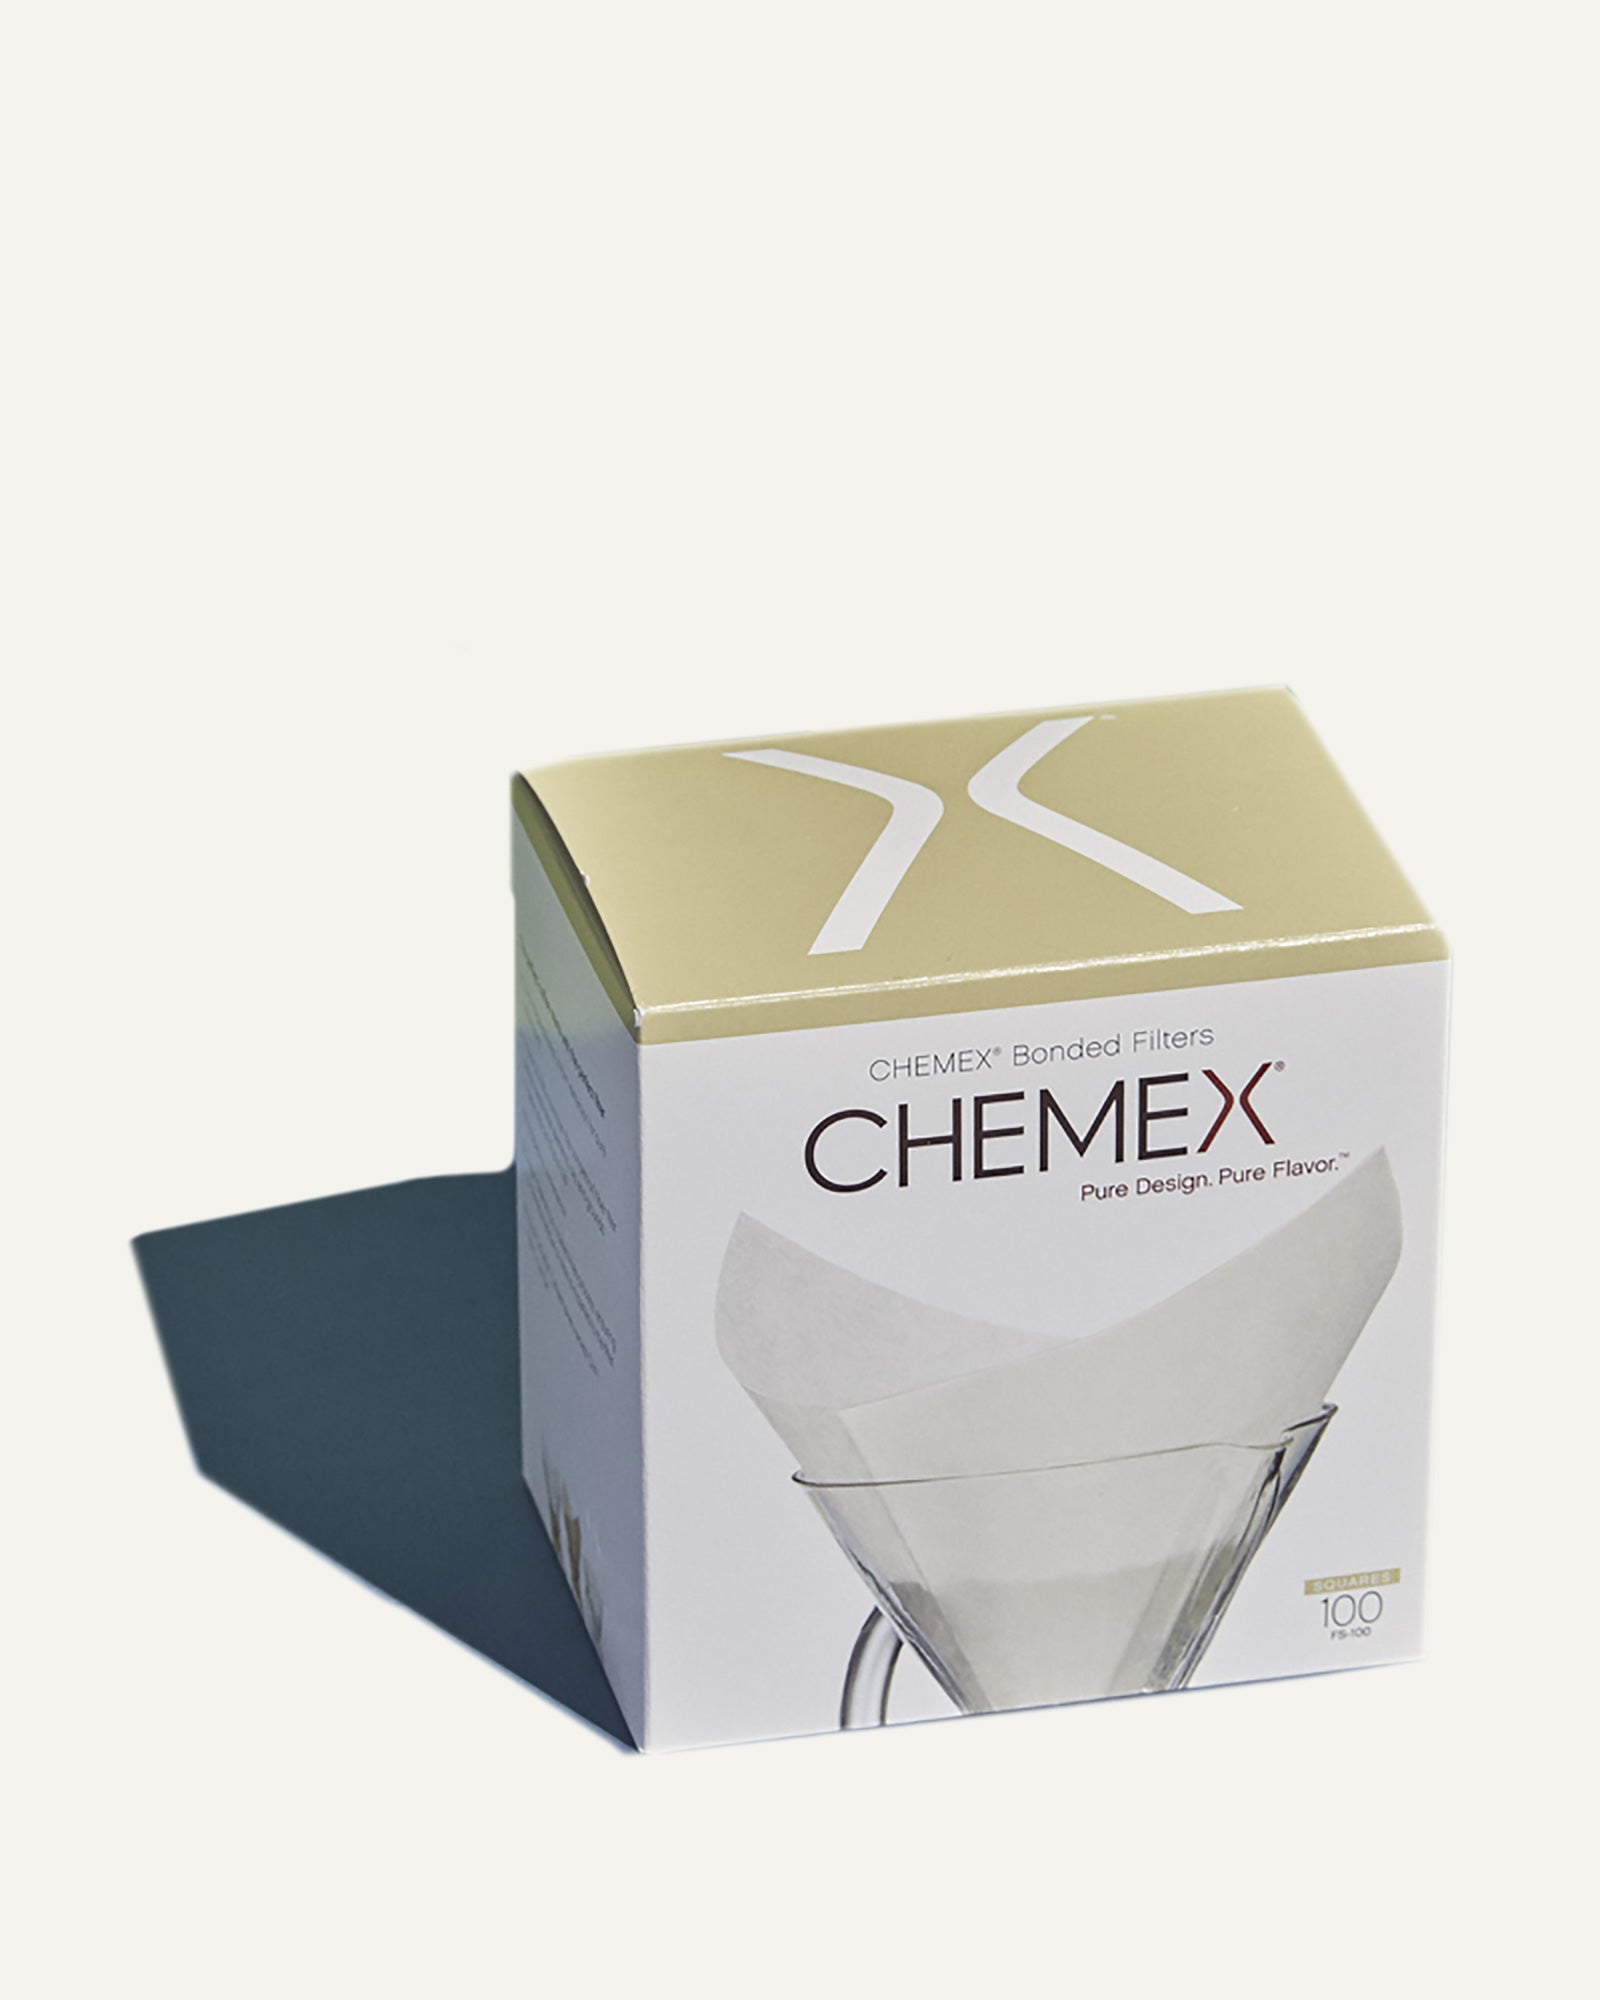 A box of Chemex Filters for pour over coffee